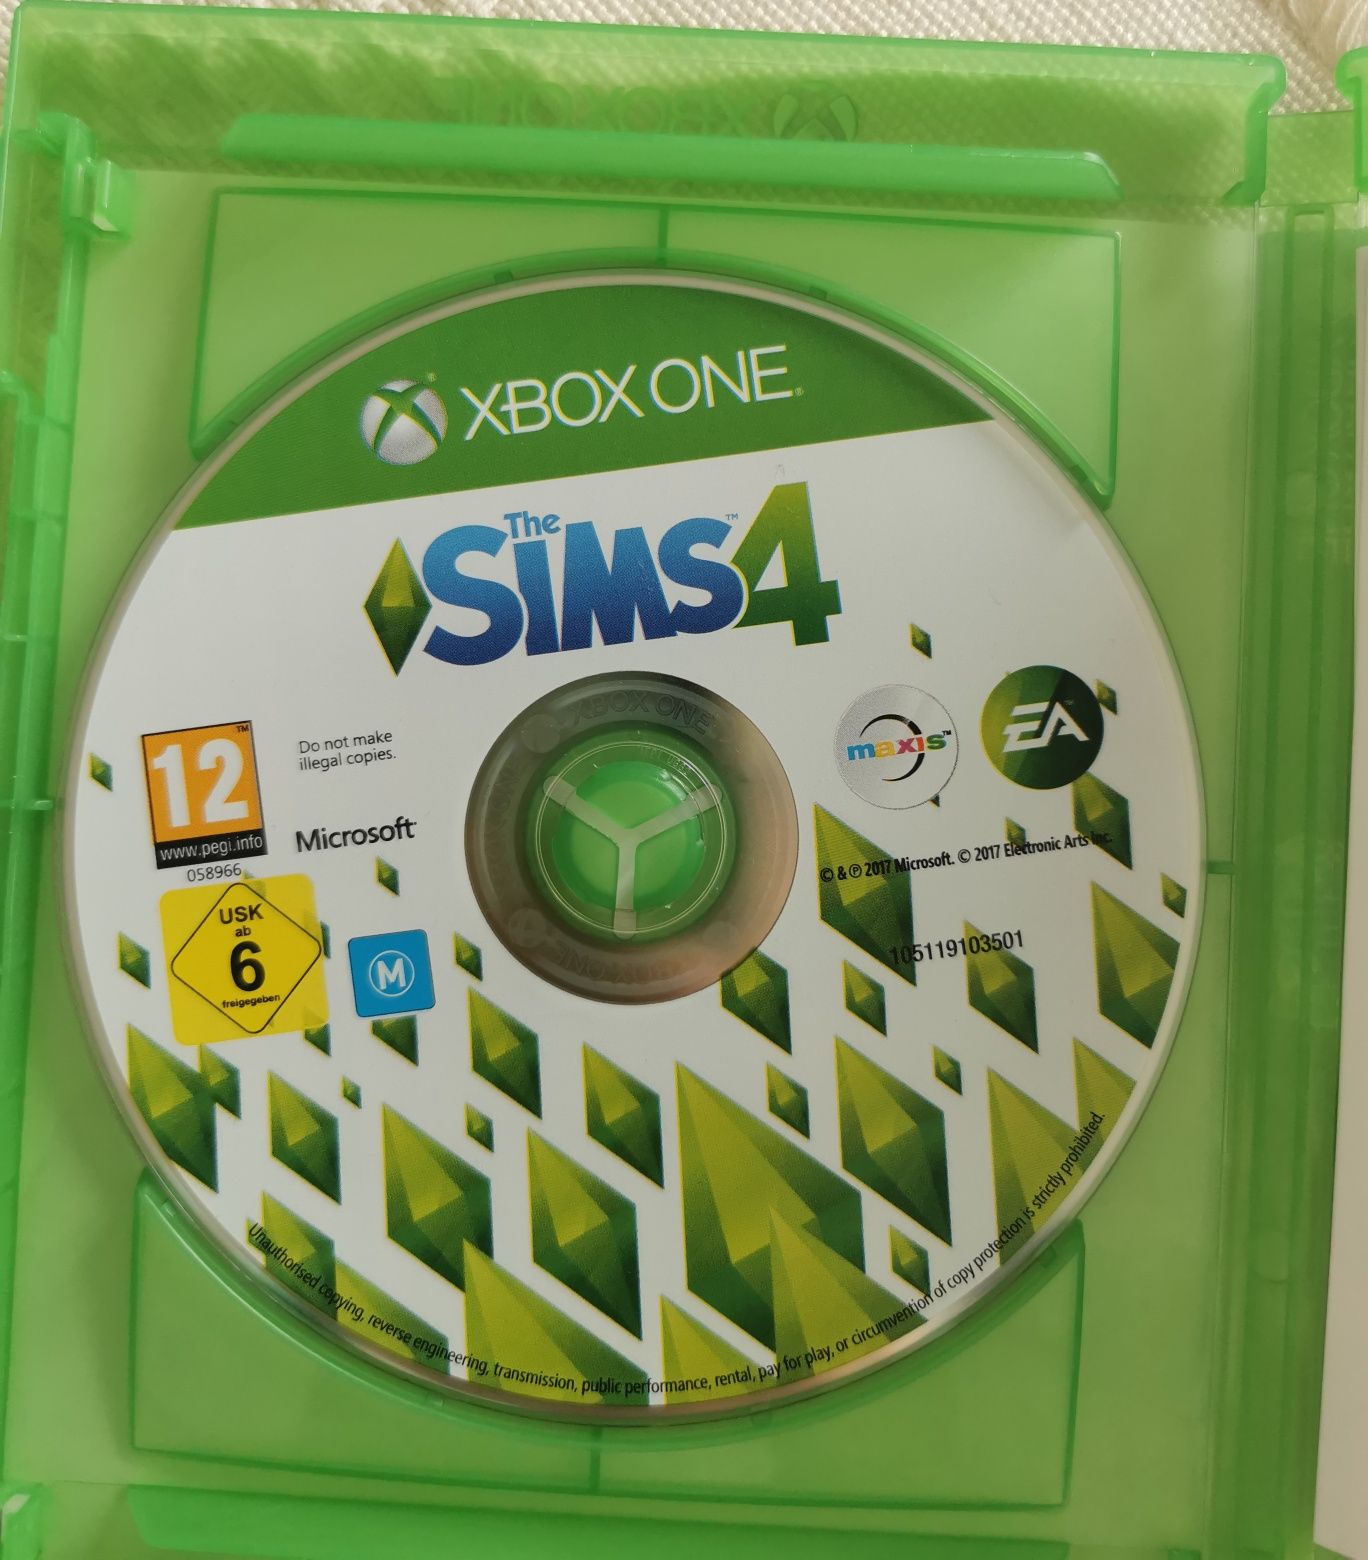 The Sims 4 X box one